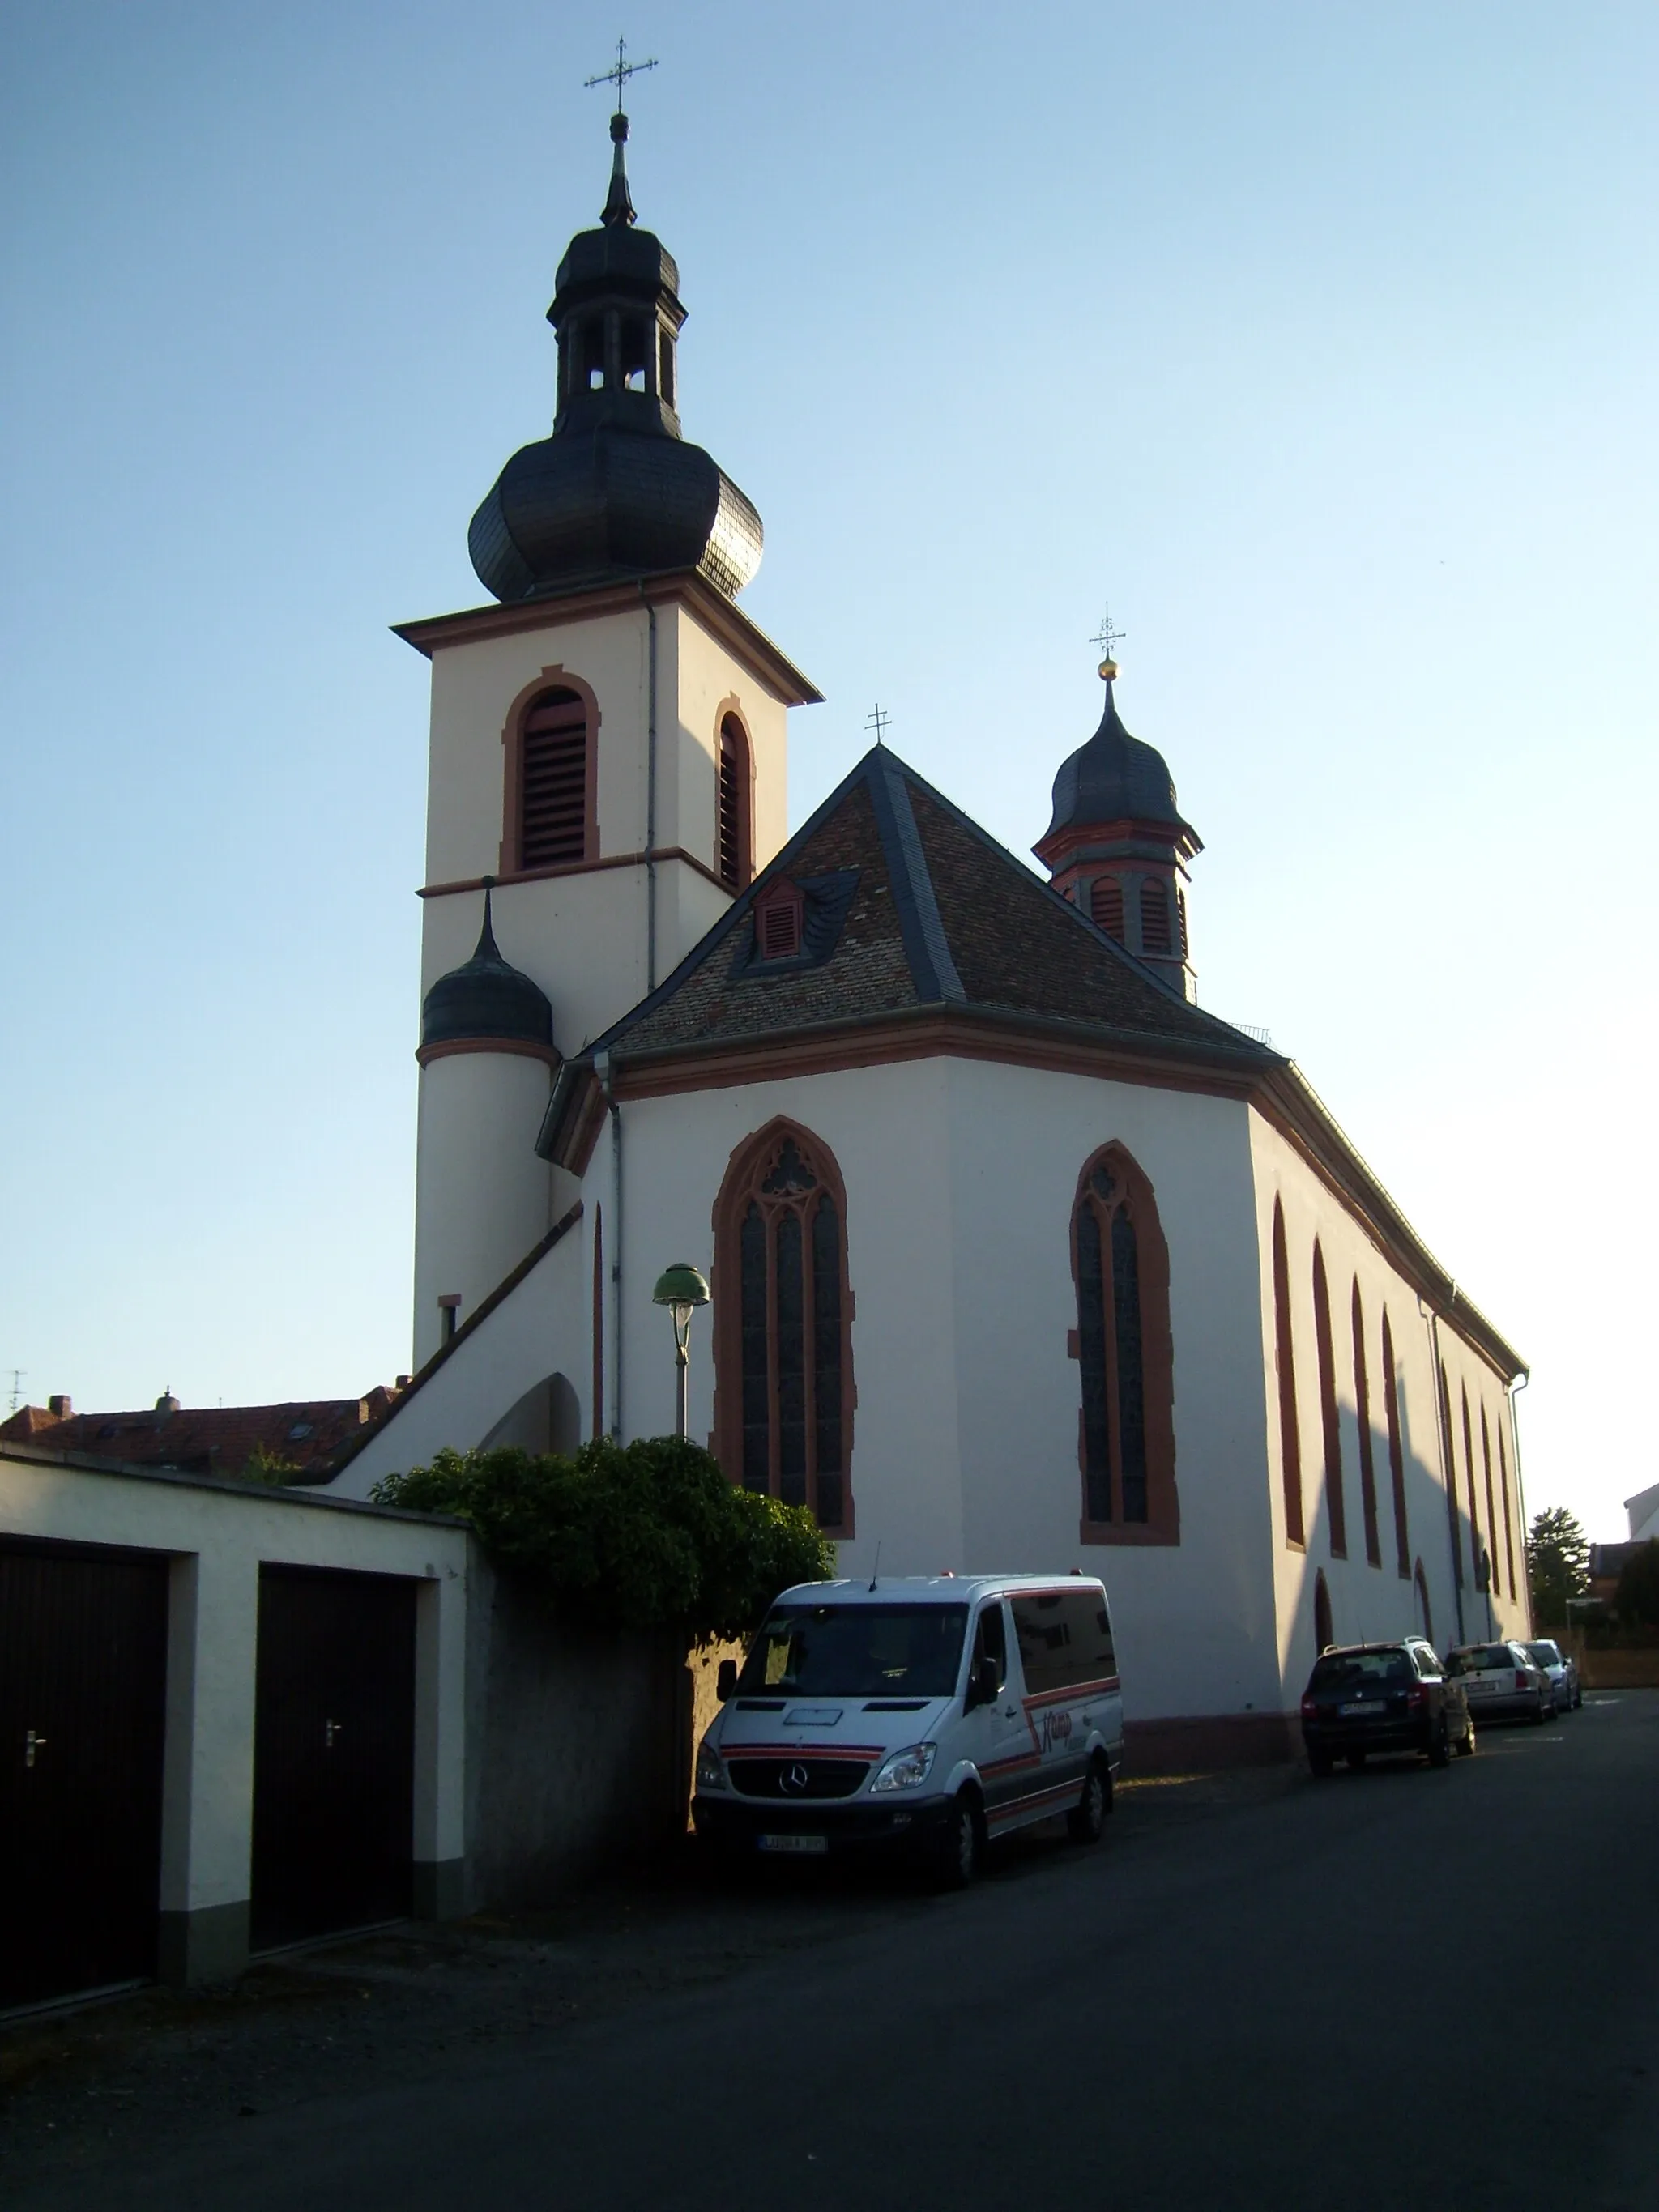 Photo showing: Catholic parish church "St. Maria Himmelskron" in Worms-Hochheim, founded in 1299